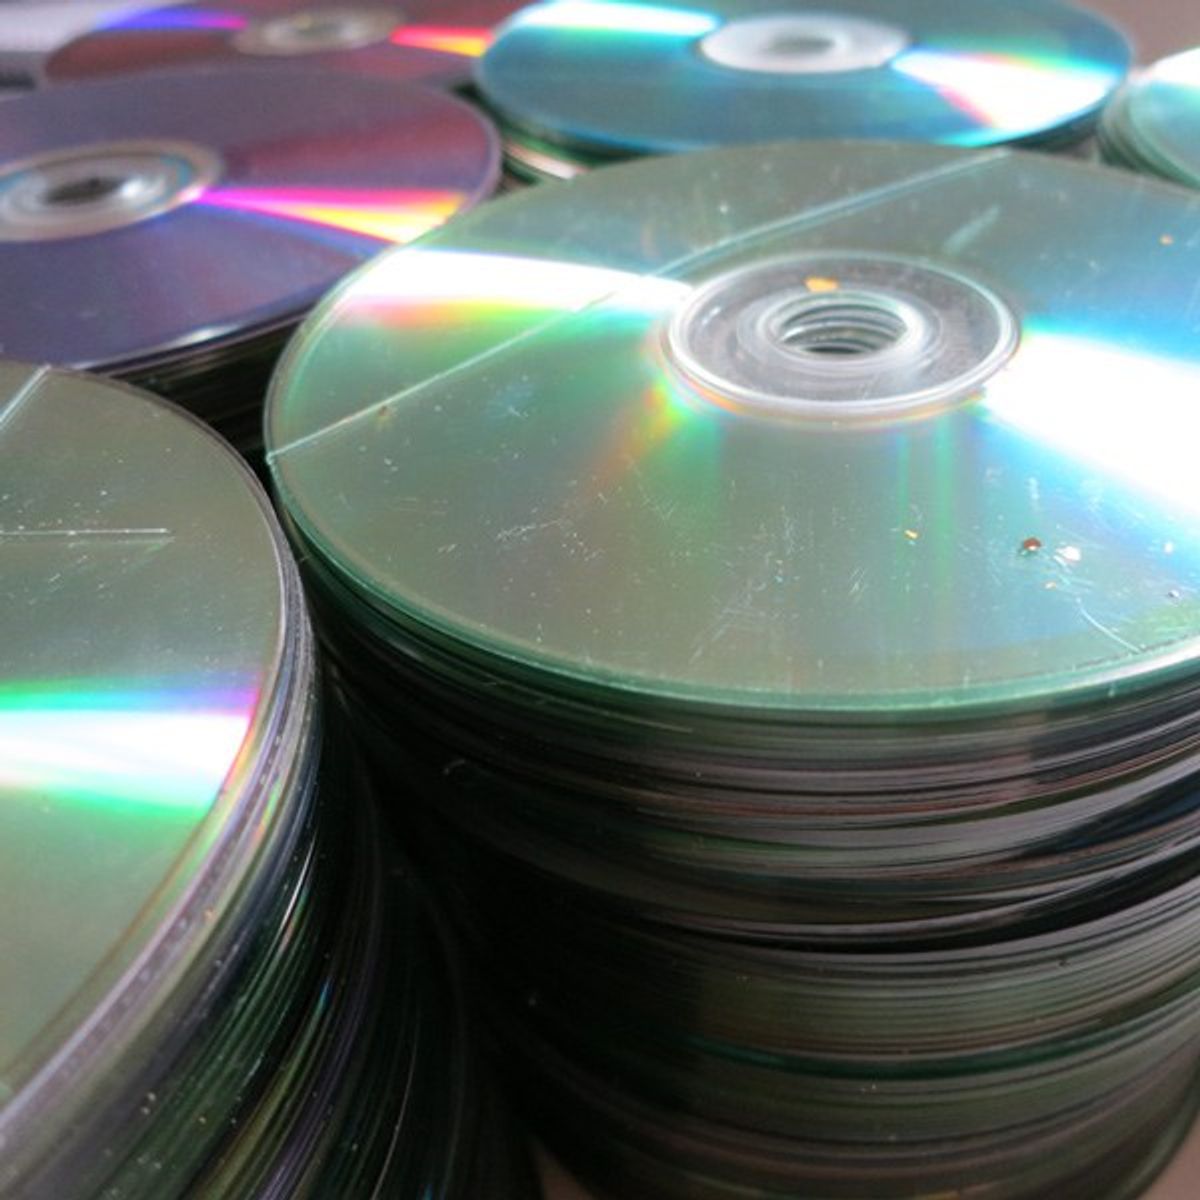 Using Old CD's